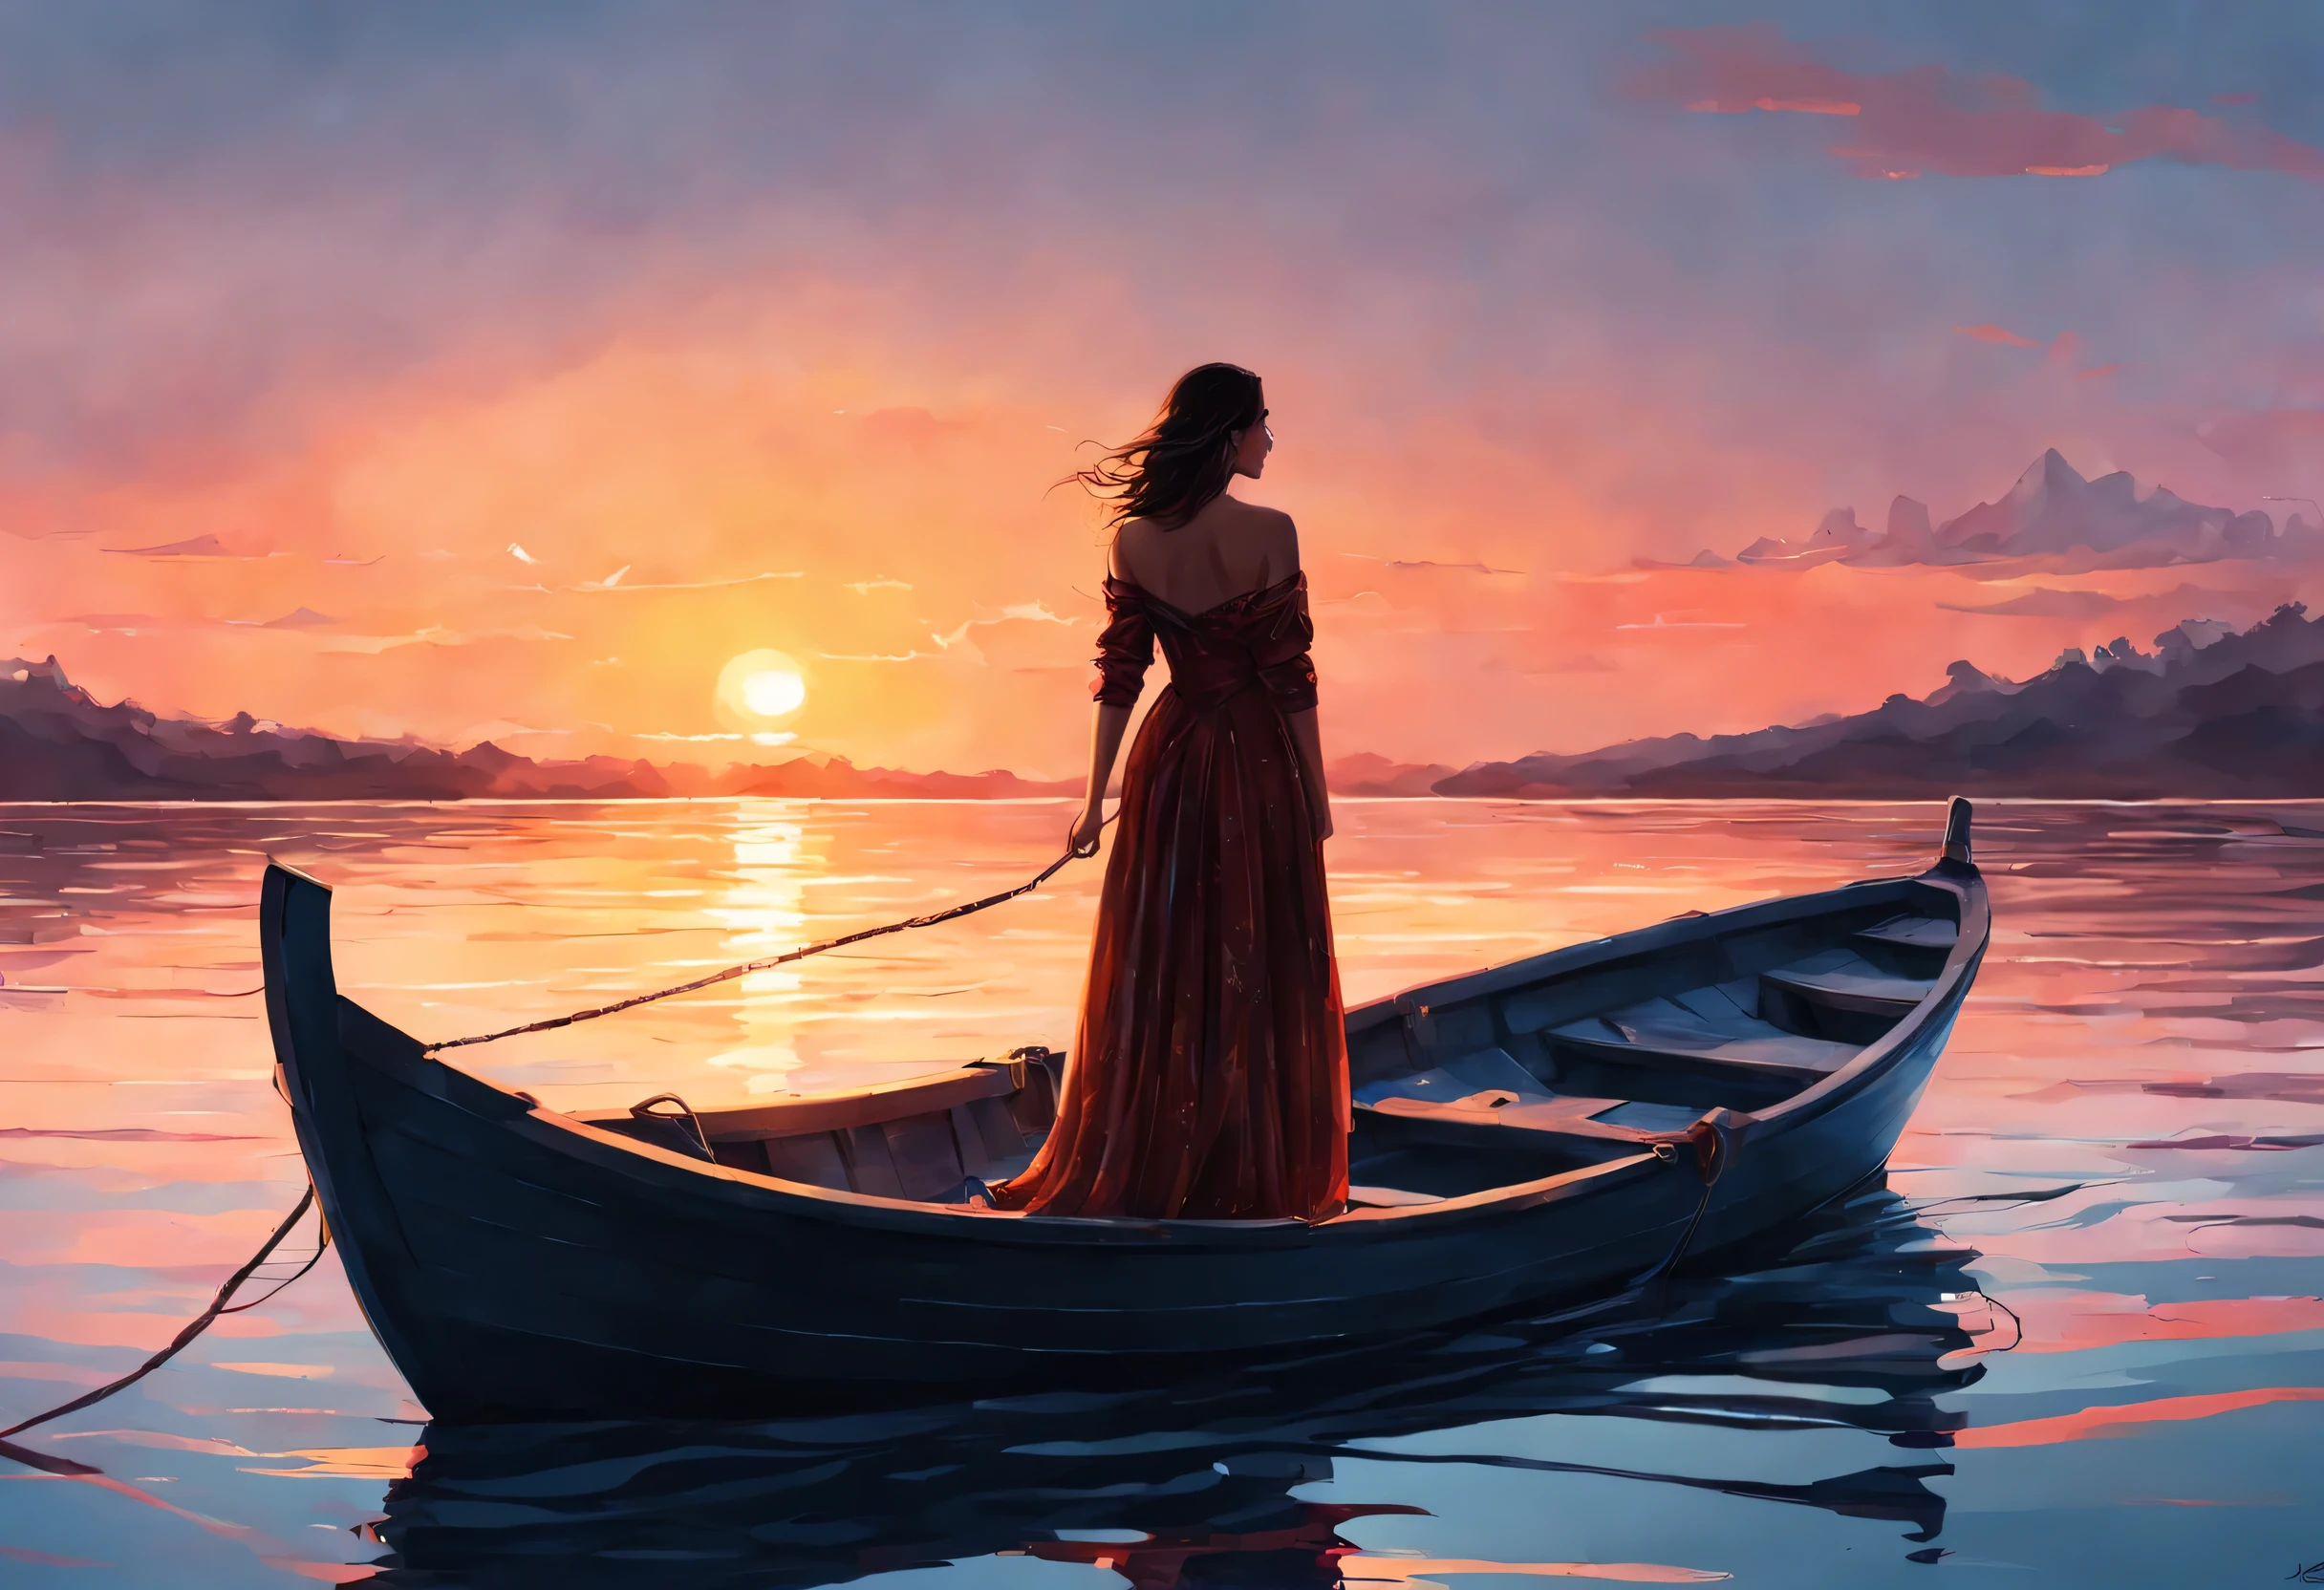 woman standing on a boat in the water, art of Alena Enami, Sunset illustration, style of Alena Enami, art. Alena Enami, inspired by Alena Enami, from Alena Enami, in style of digital illustration, Charlie Bowater: art style, style of Alena Enami, good night. digital illustration